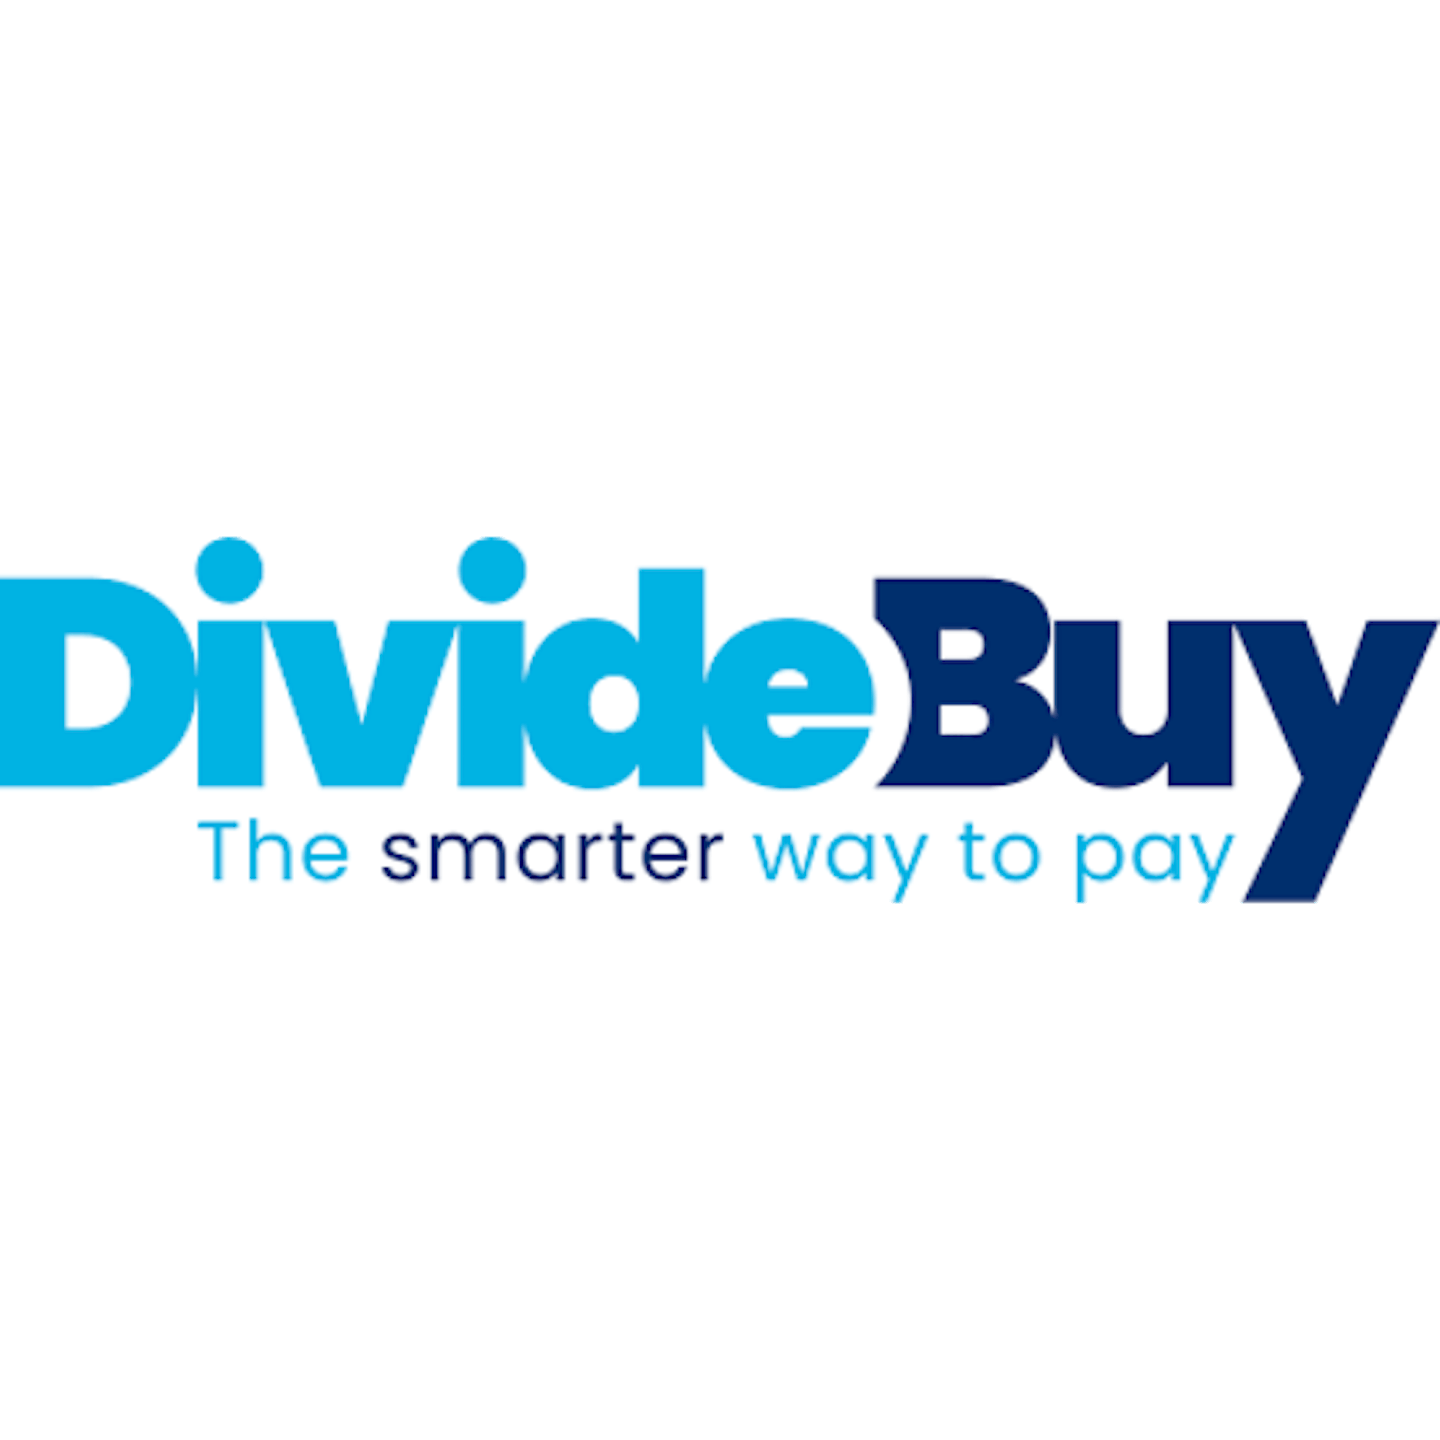 Buy now pay later apps DivideBuy